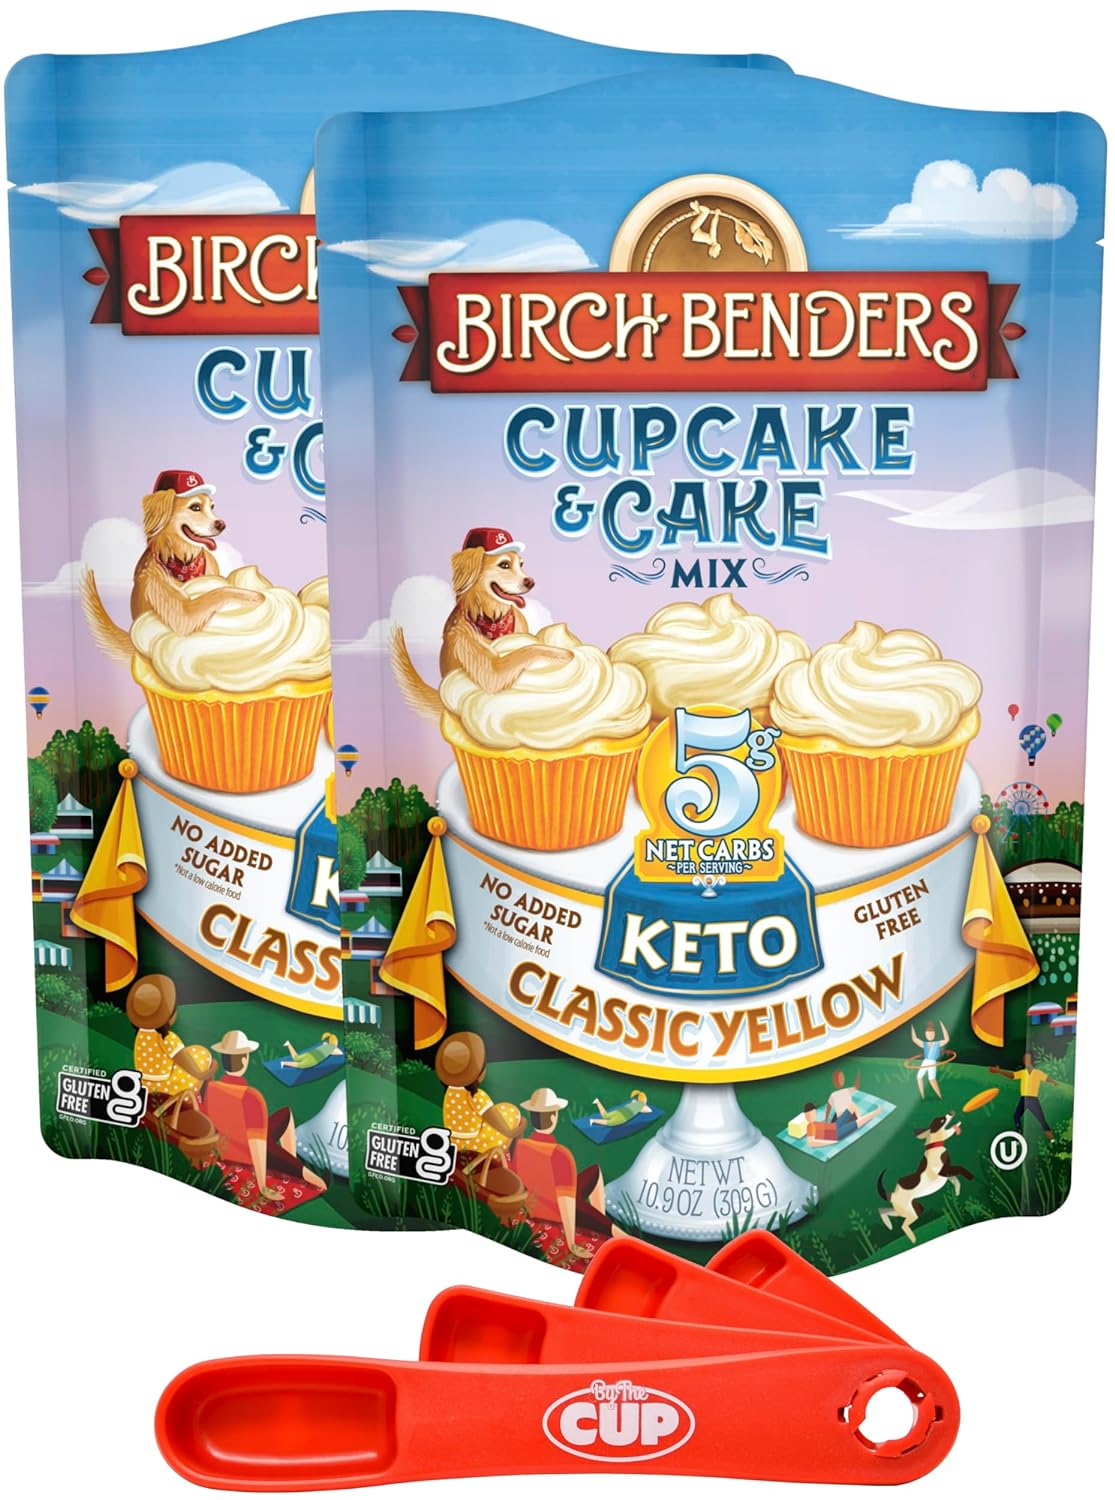 Birch Benders Keto Classic Yellow Cupcake & Cake Mix Bundle, 10.9 oz (Pack of 2) with By The Cup Swivel Spoons